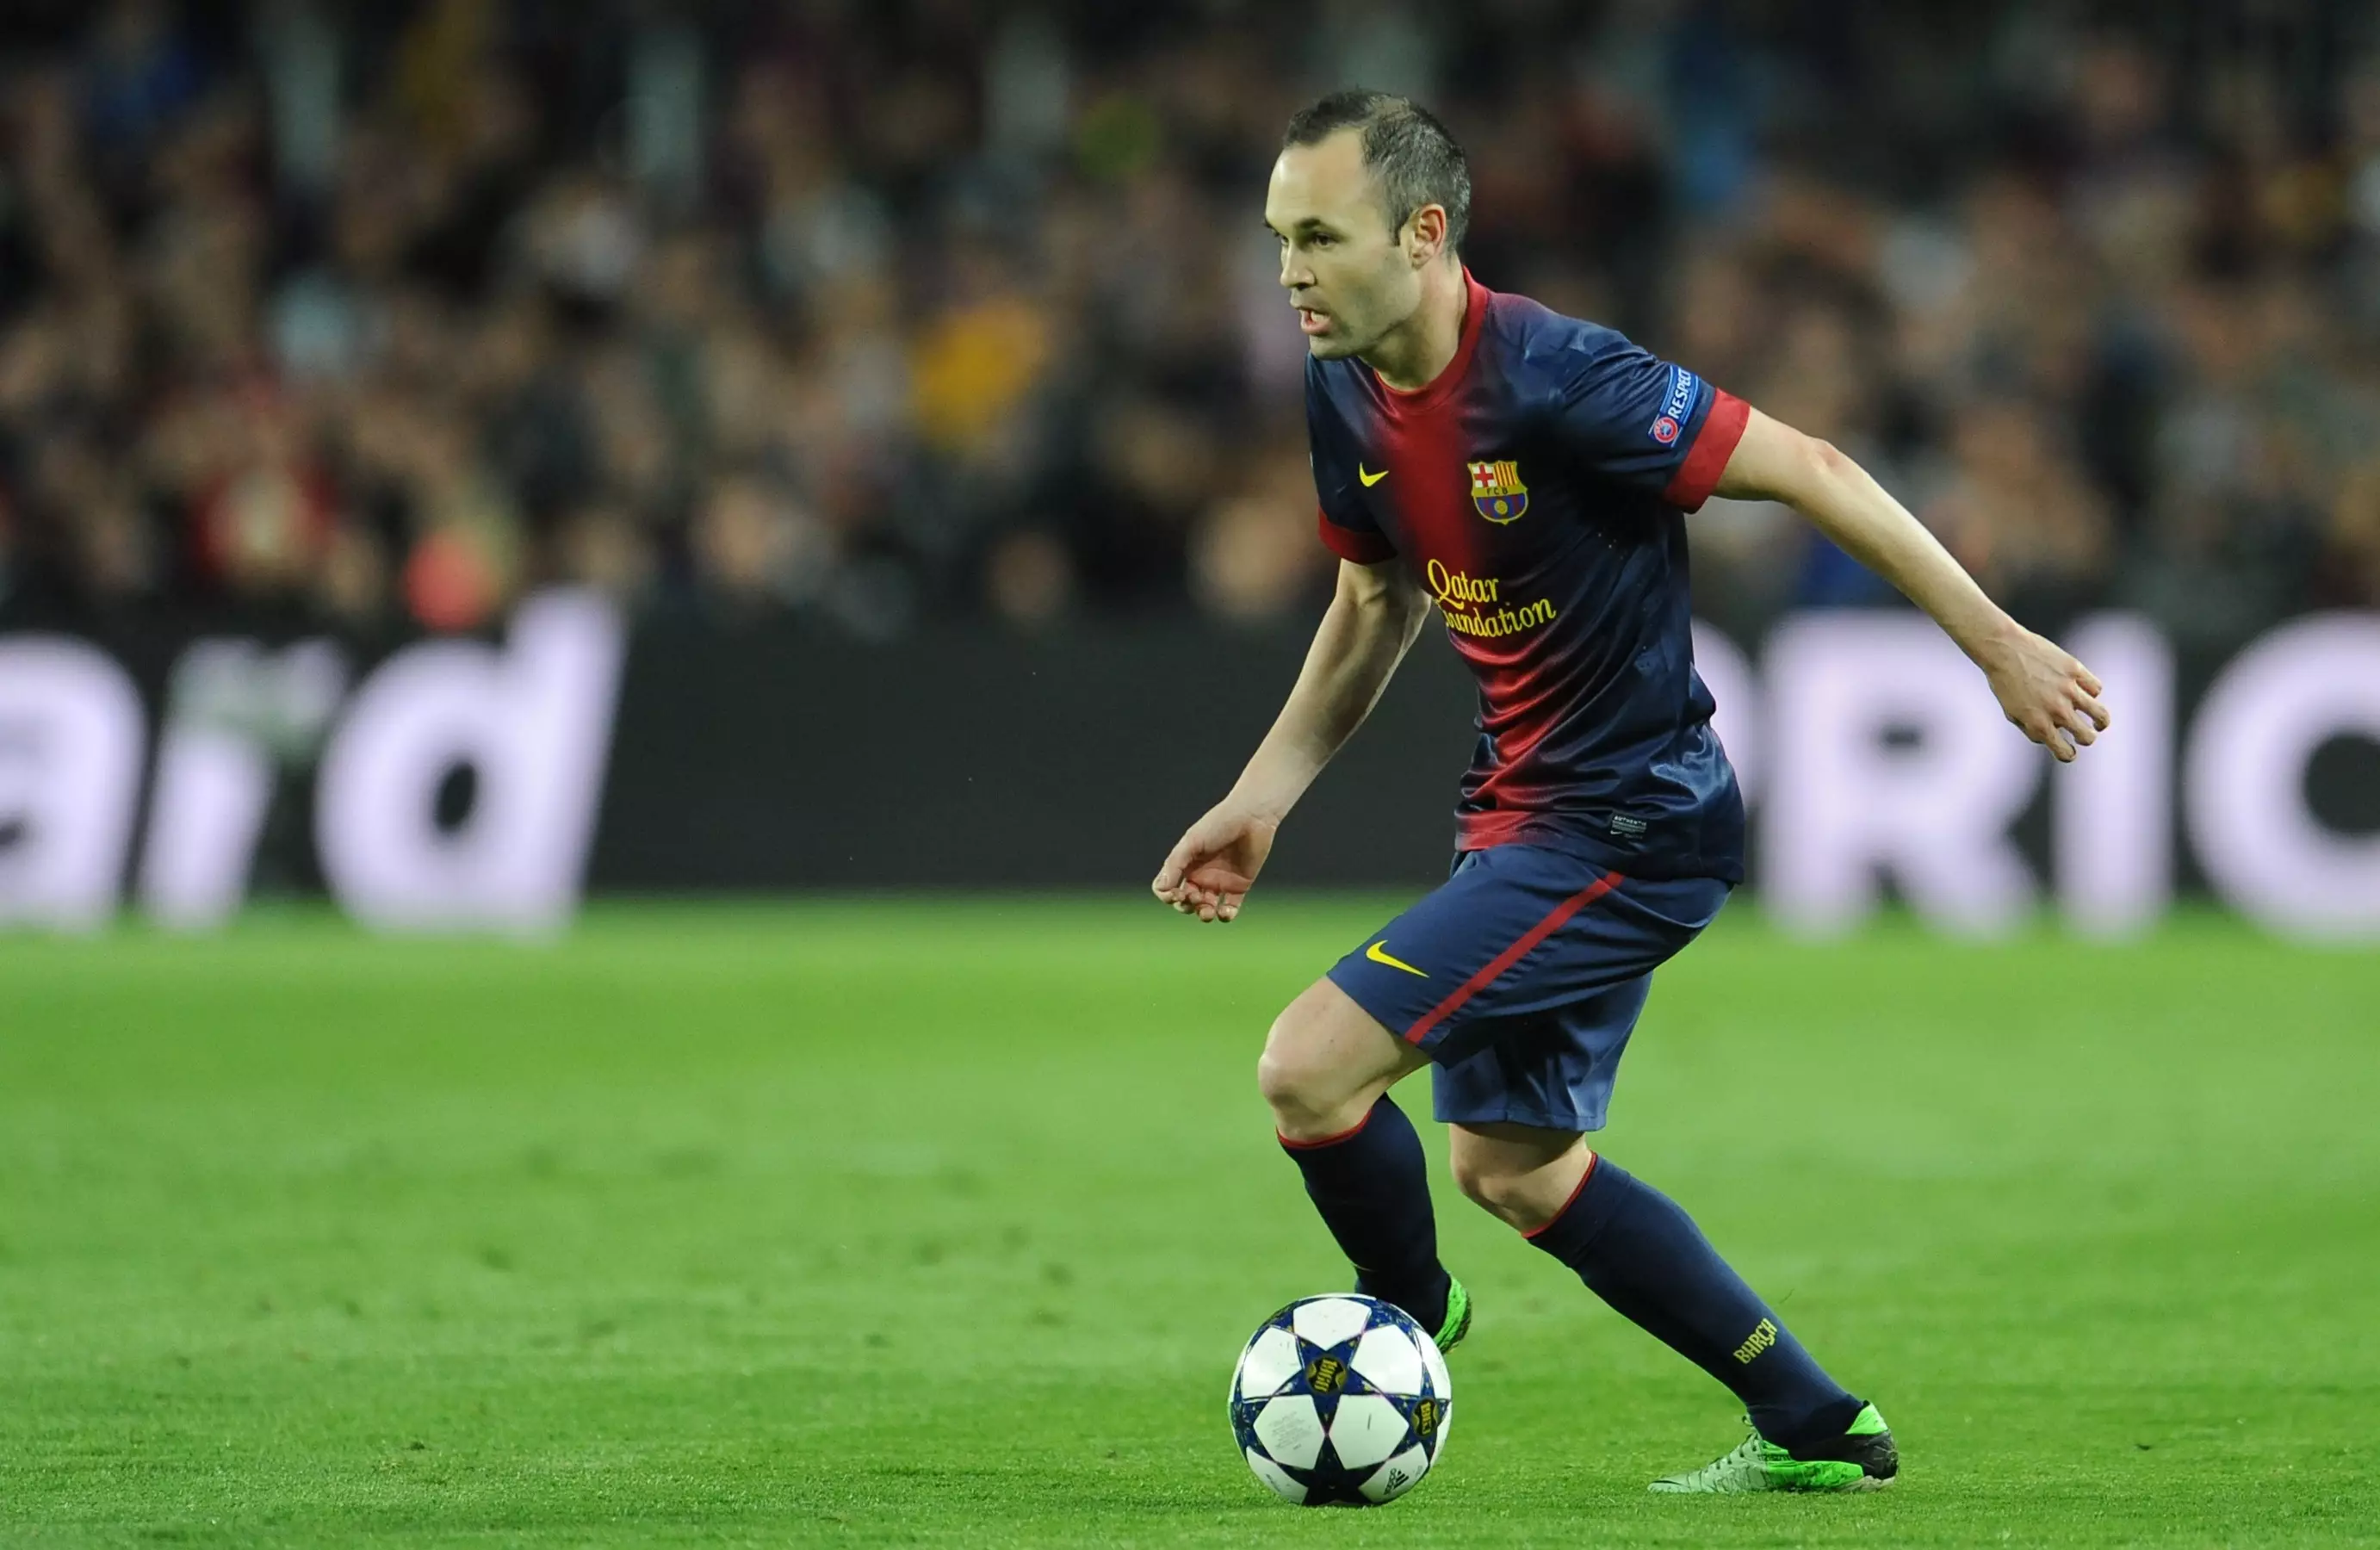 Iniesta made over 650 appearances for Barcelona. Image: PA Images